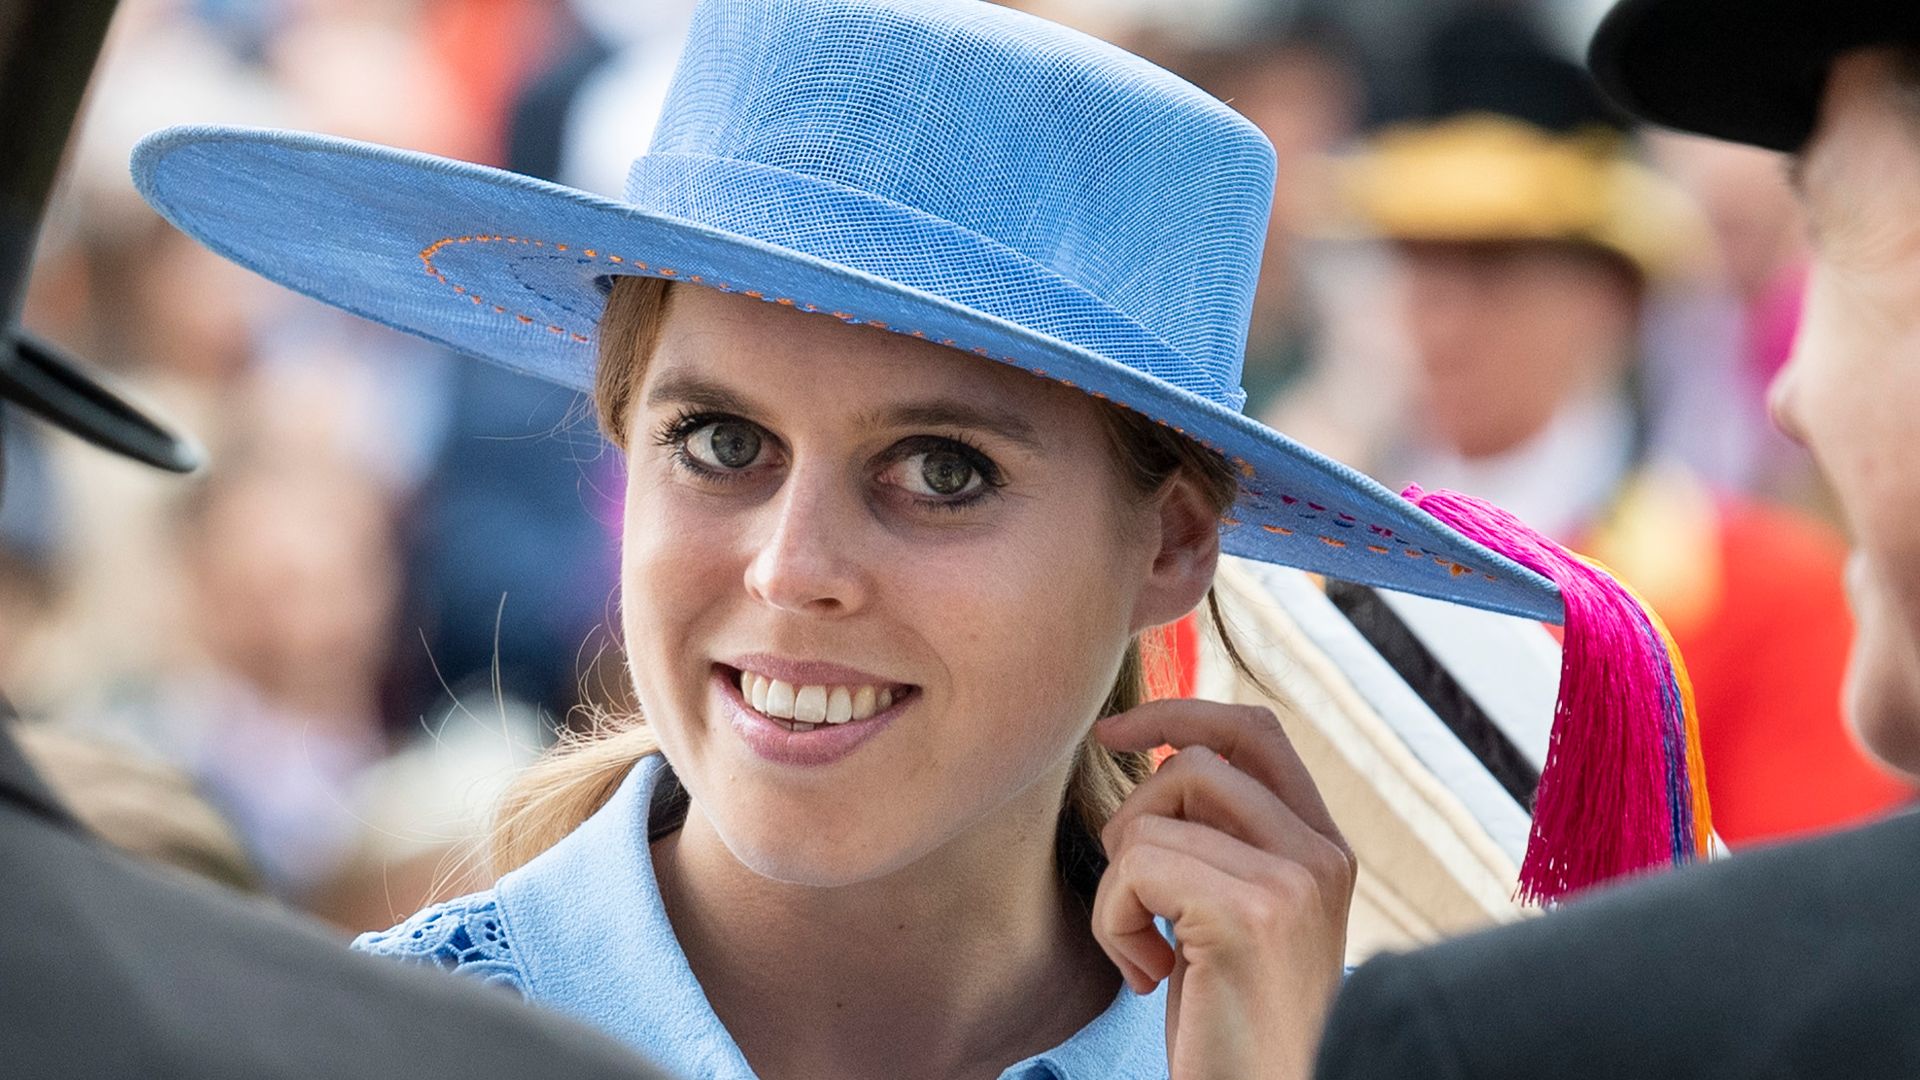 Princess Beatrice's ultra rare tiara moment had fans seriously confused